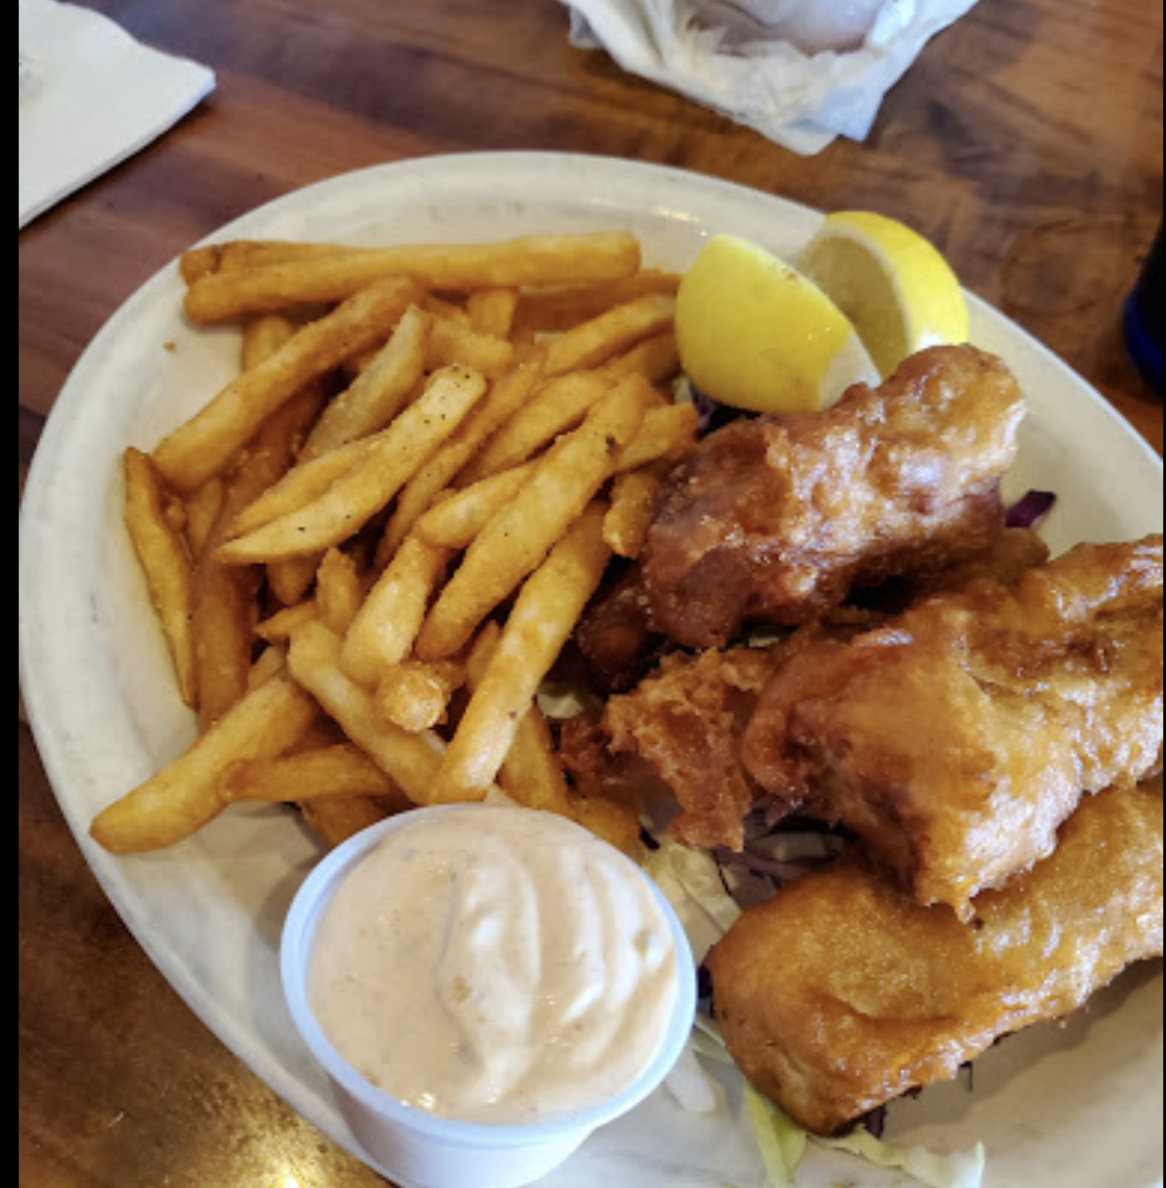 Breakers fish and chips